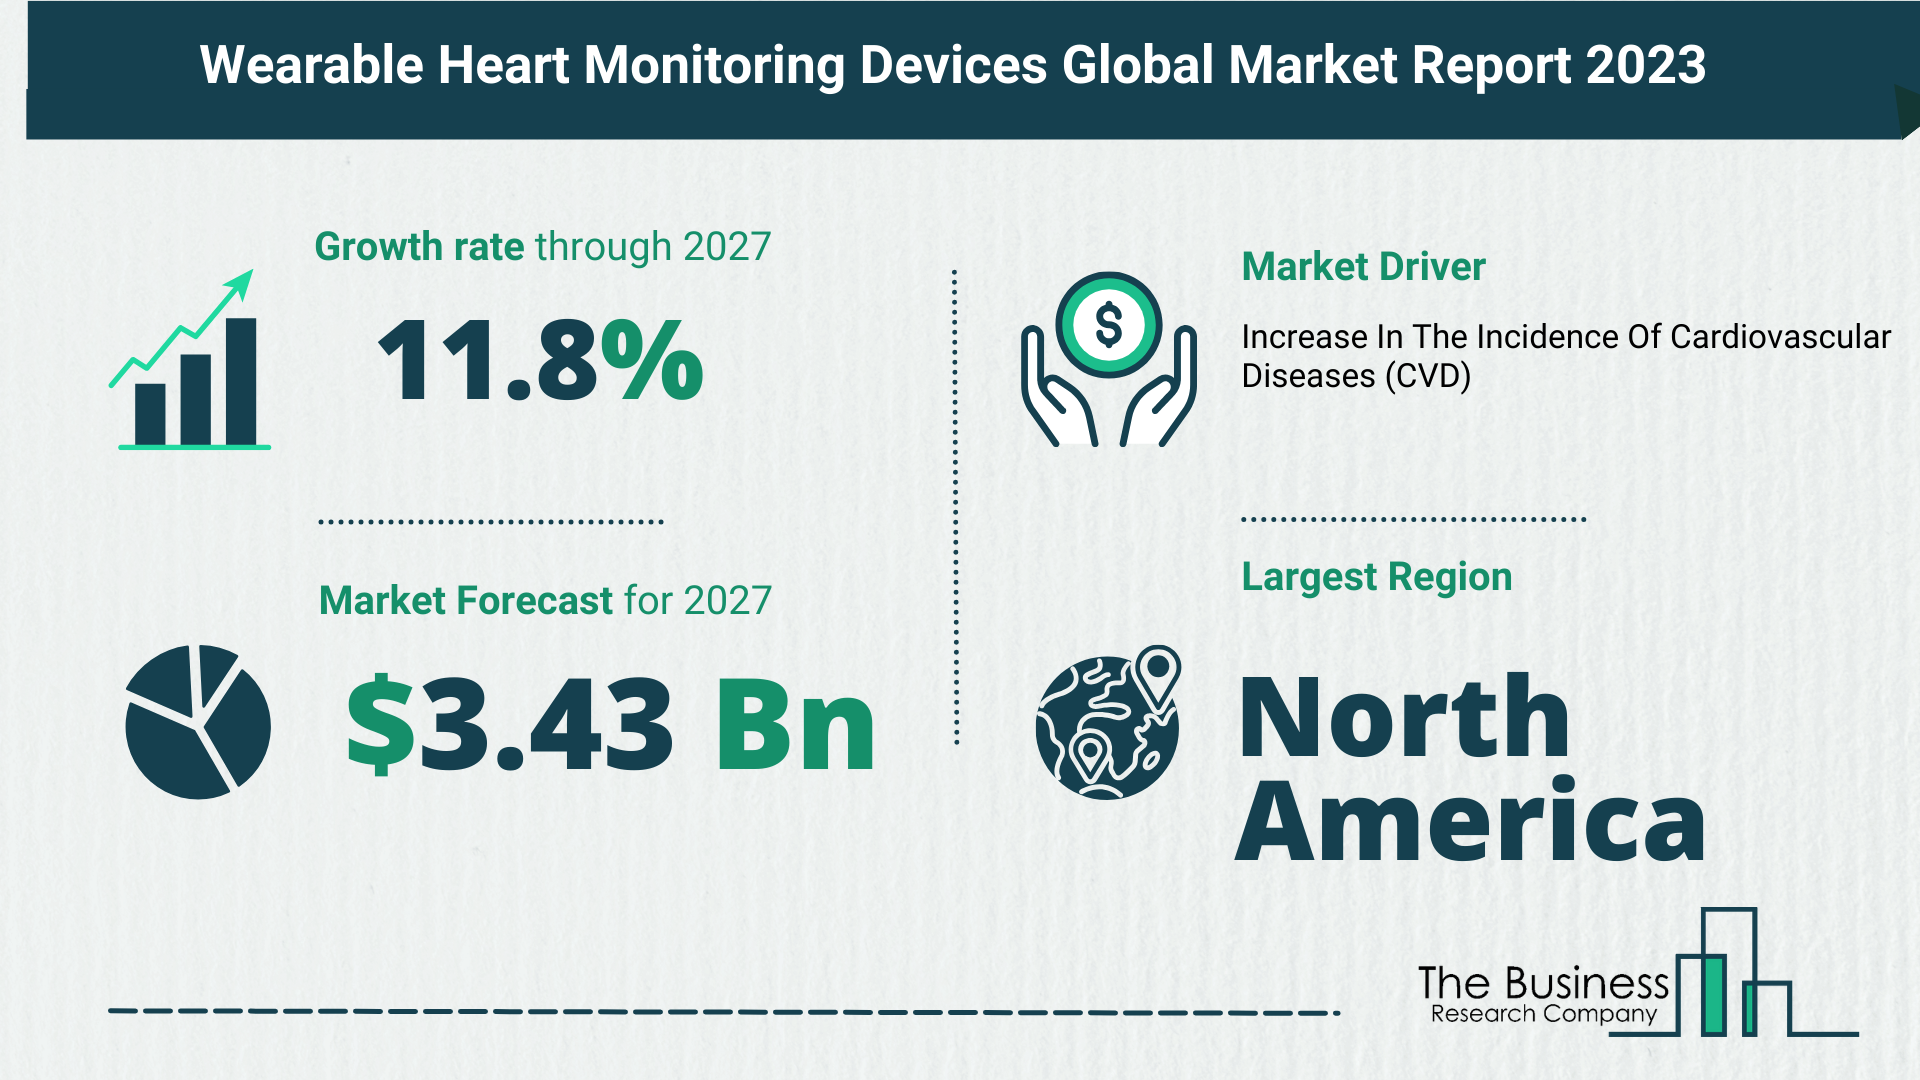 Global Wearable Heart Monitoring Devices Market